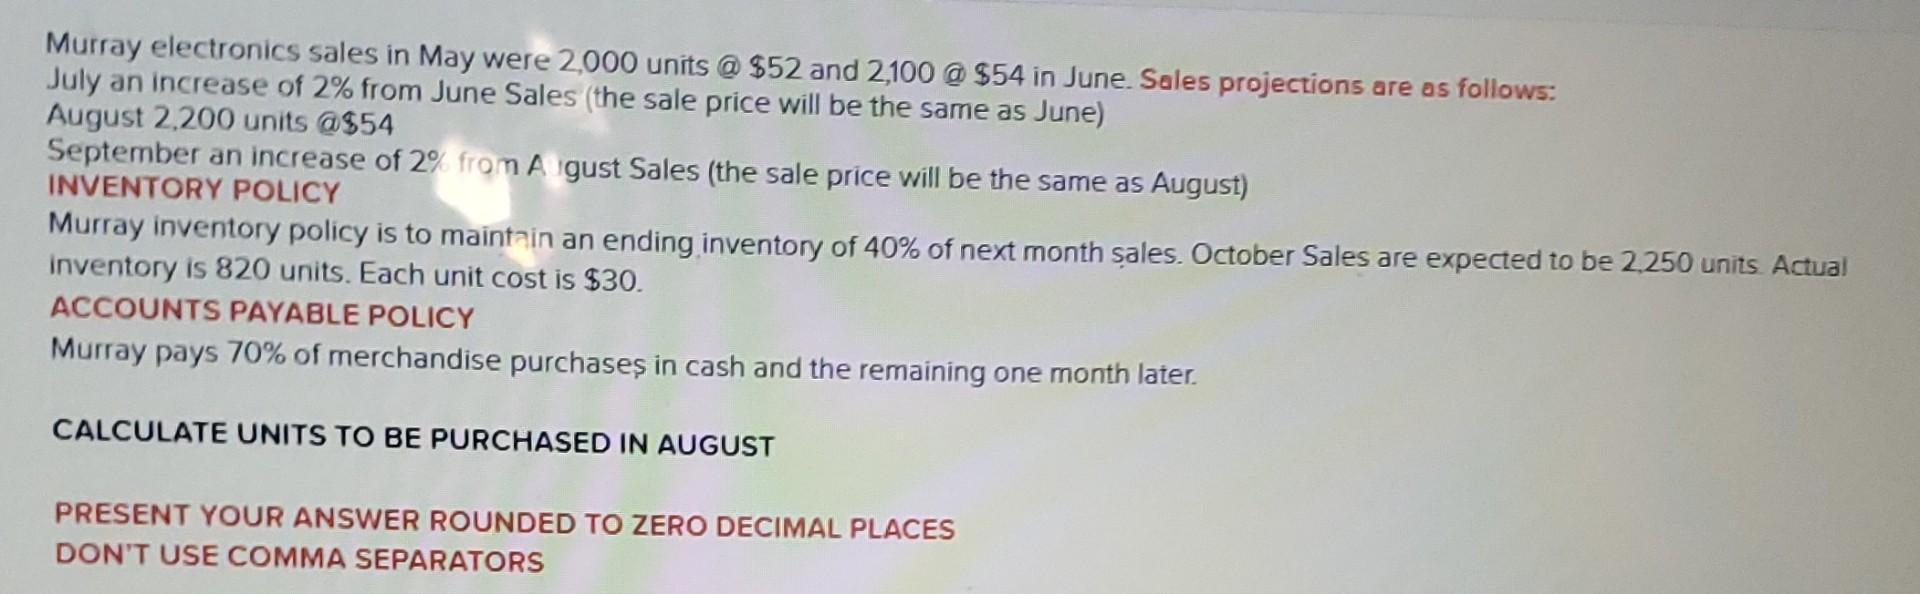 Murray electronics sales in May were 2,000 units @ $52 and 2,100 @ $54 in June. Sales projections are as follows: July an inc